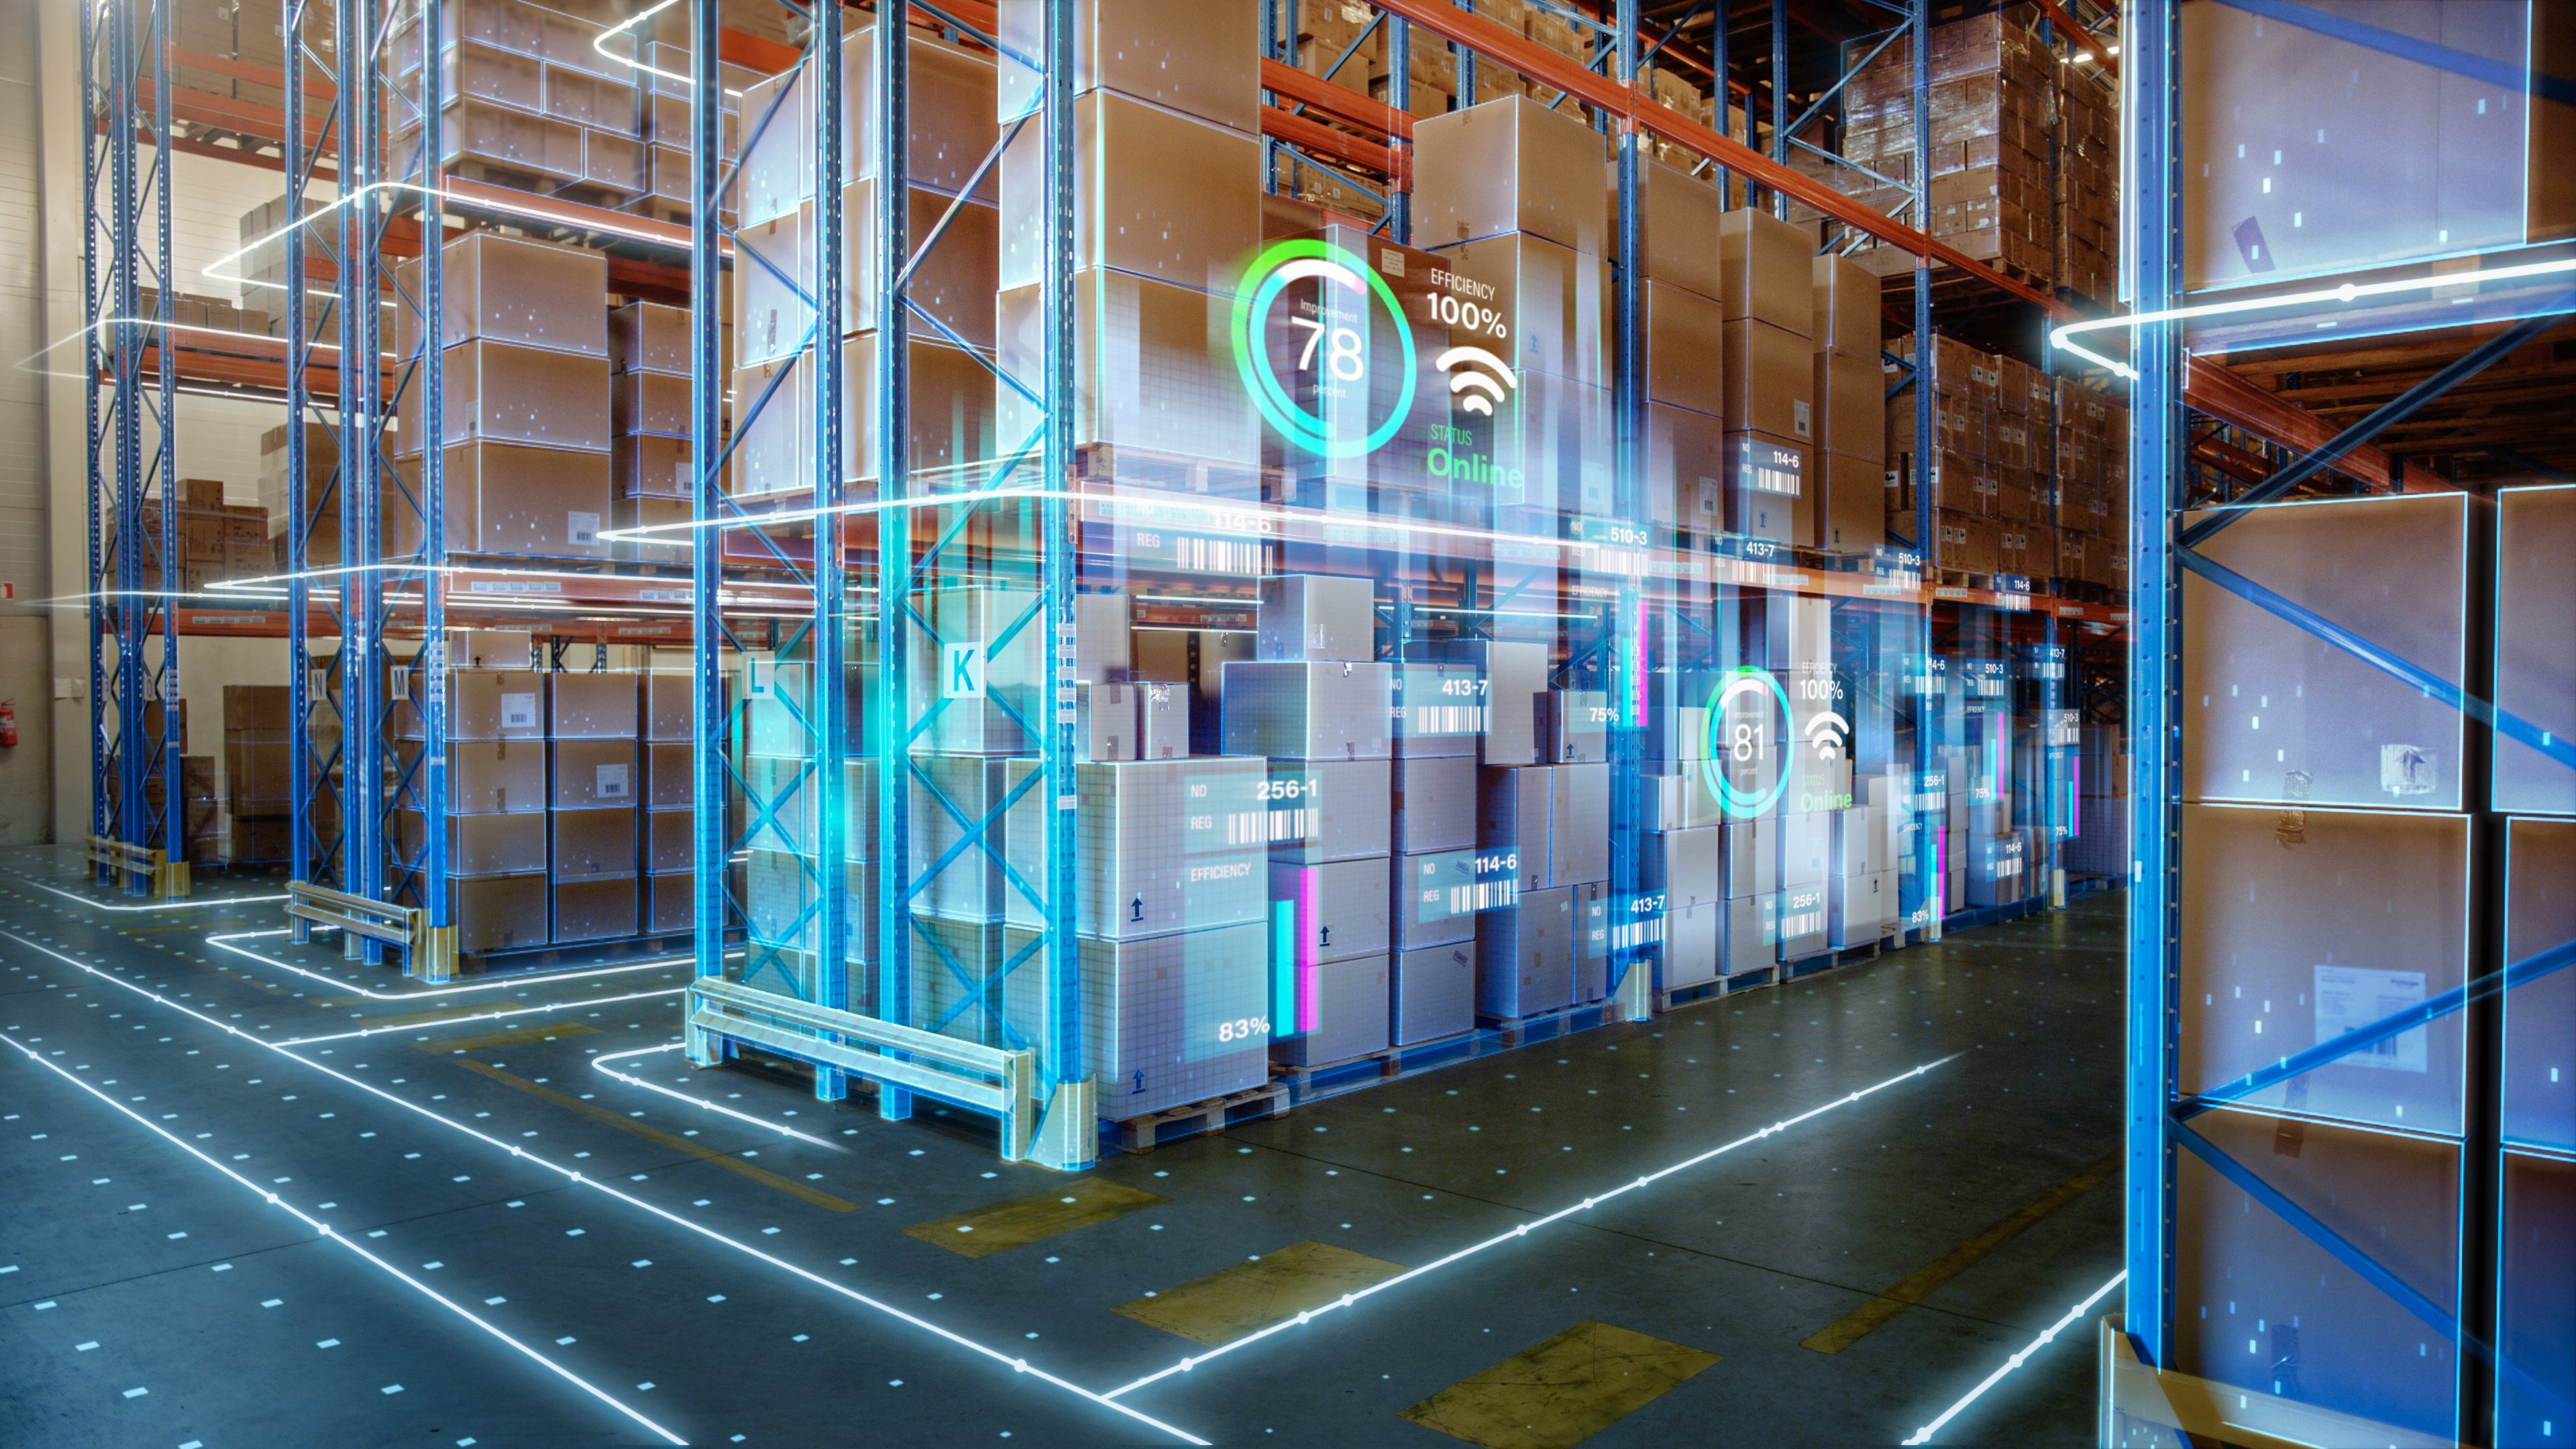 Futuristic technology warehouse controlled by a SaaS WMS/cloud WMS - a Cloud-based WMS solution 